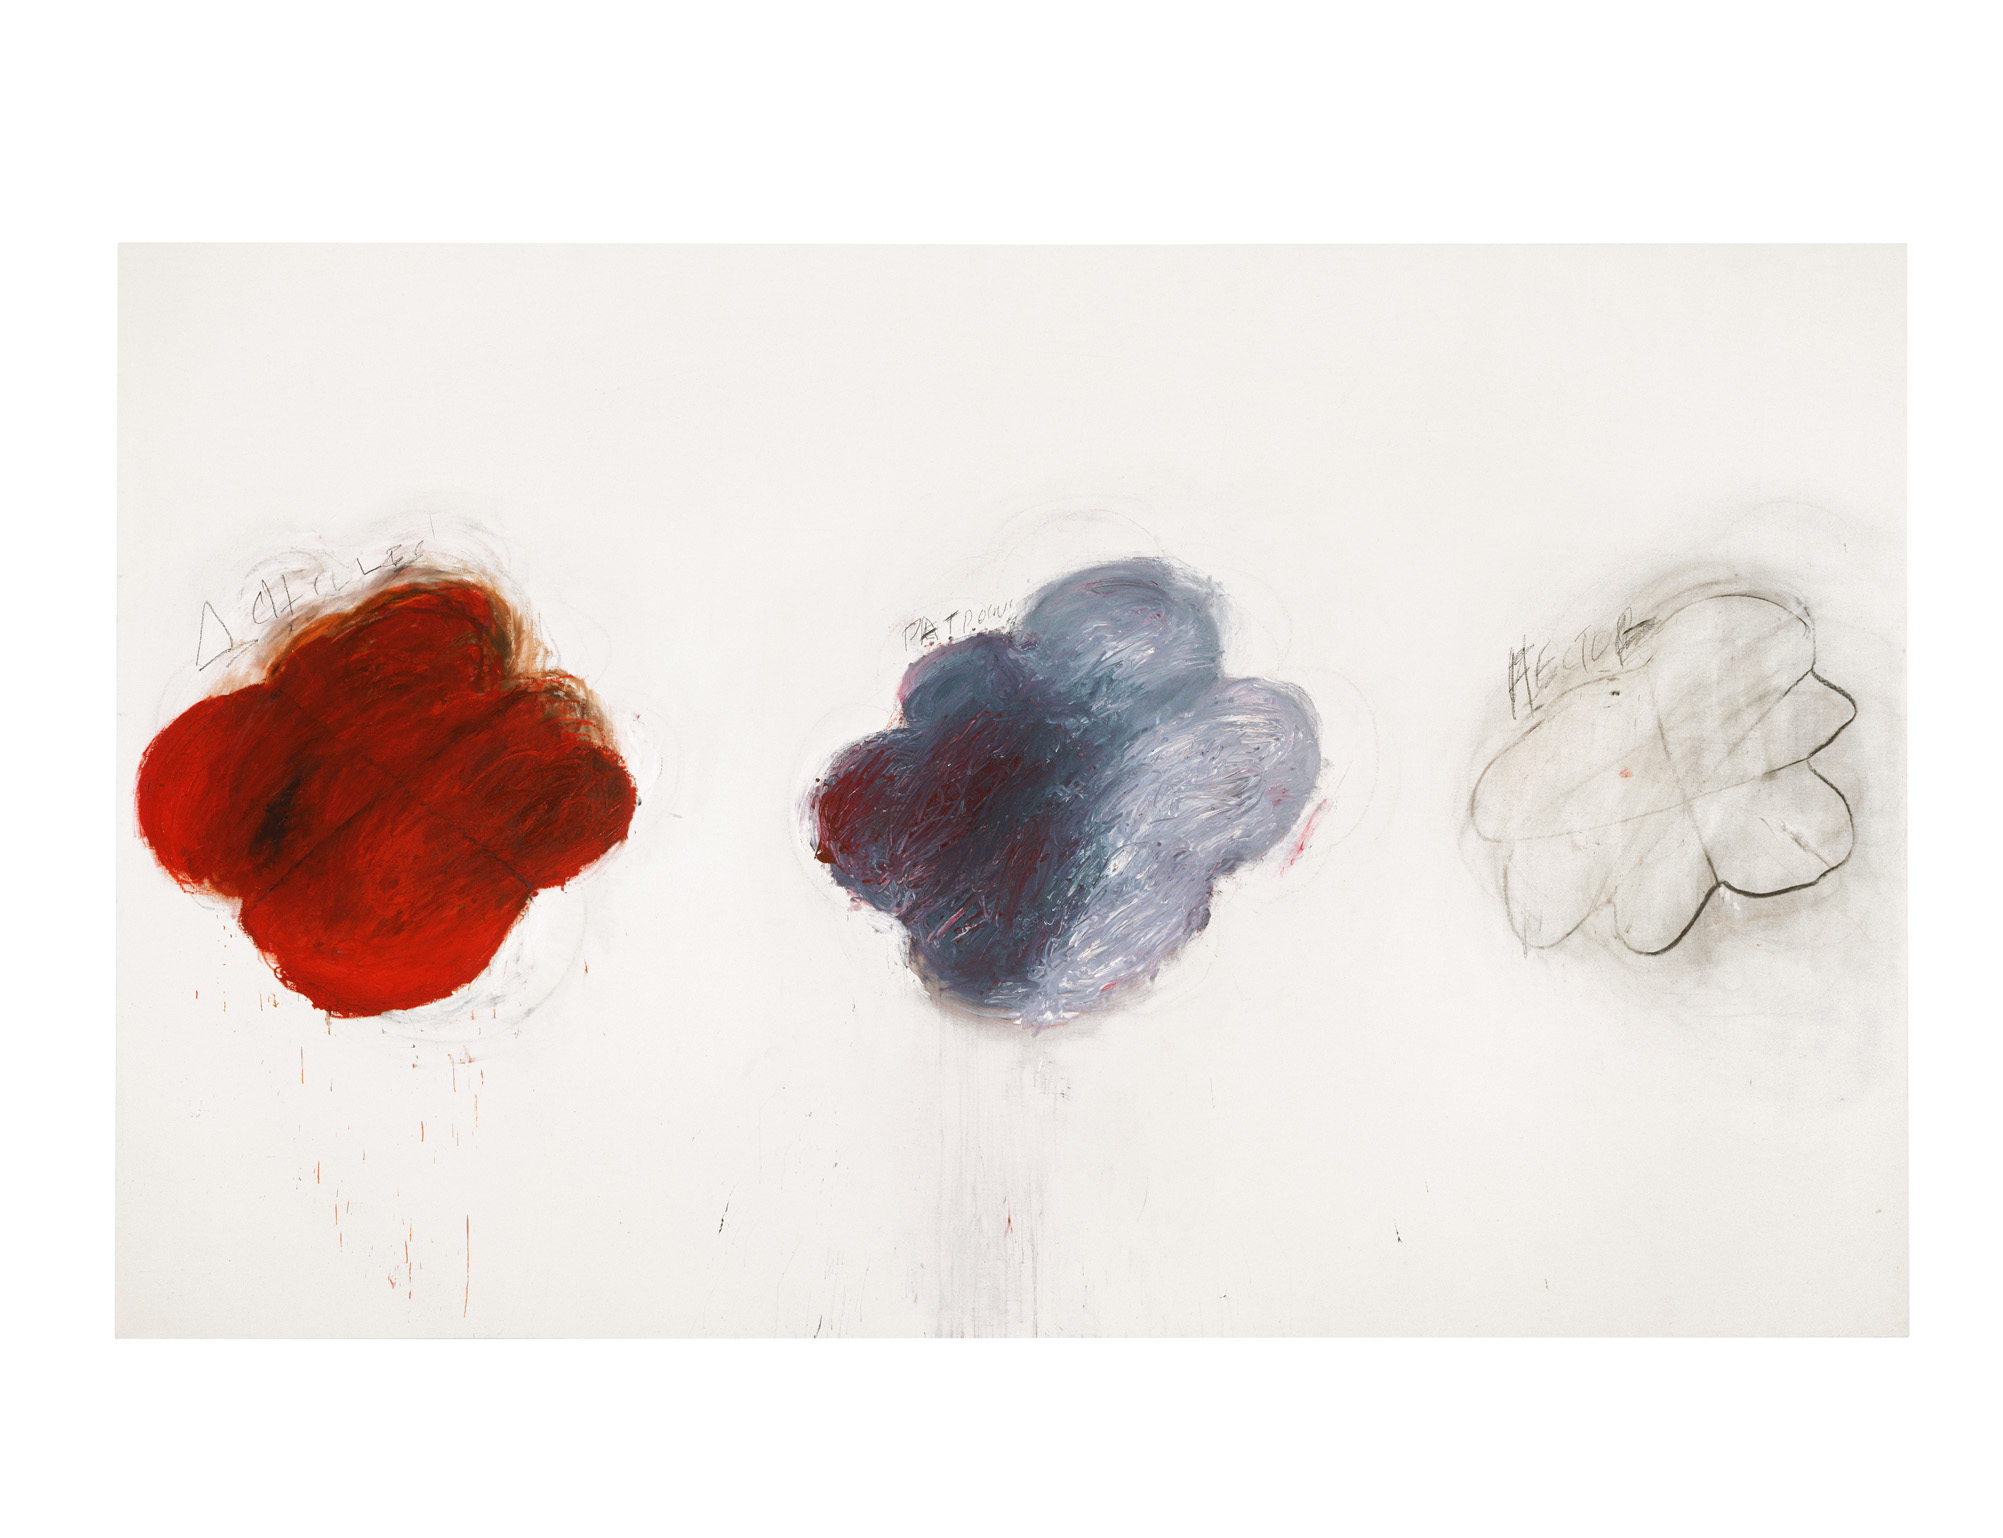 Cy Twombly (American, 1928-2011) 'Fifty Days at Iliam Shades of Achilles, Patroclus and Hector (Part VI)' 1978